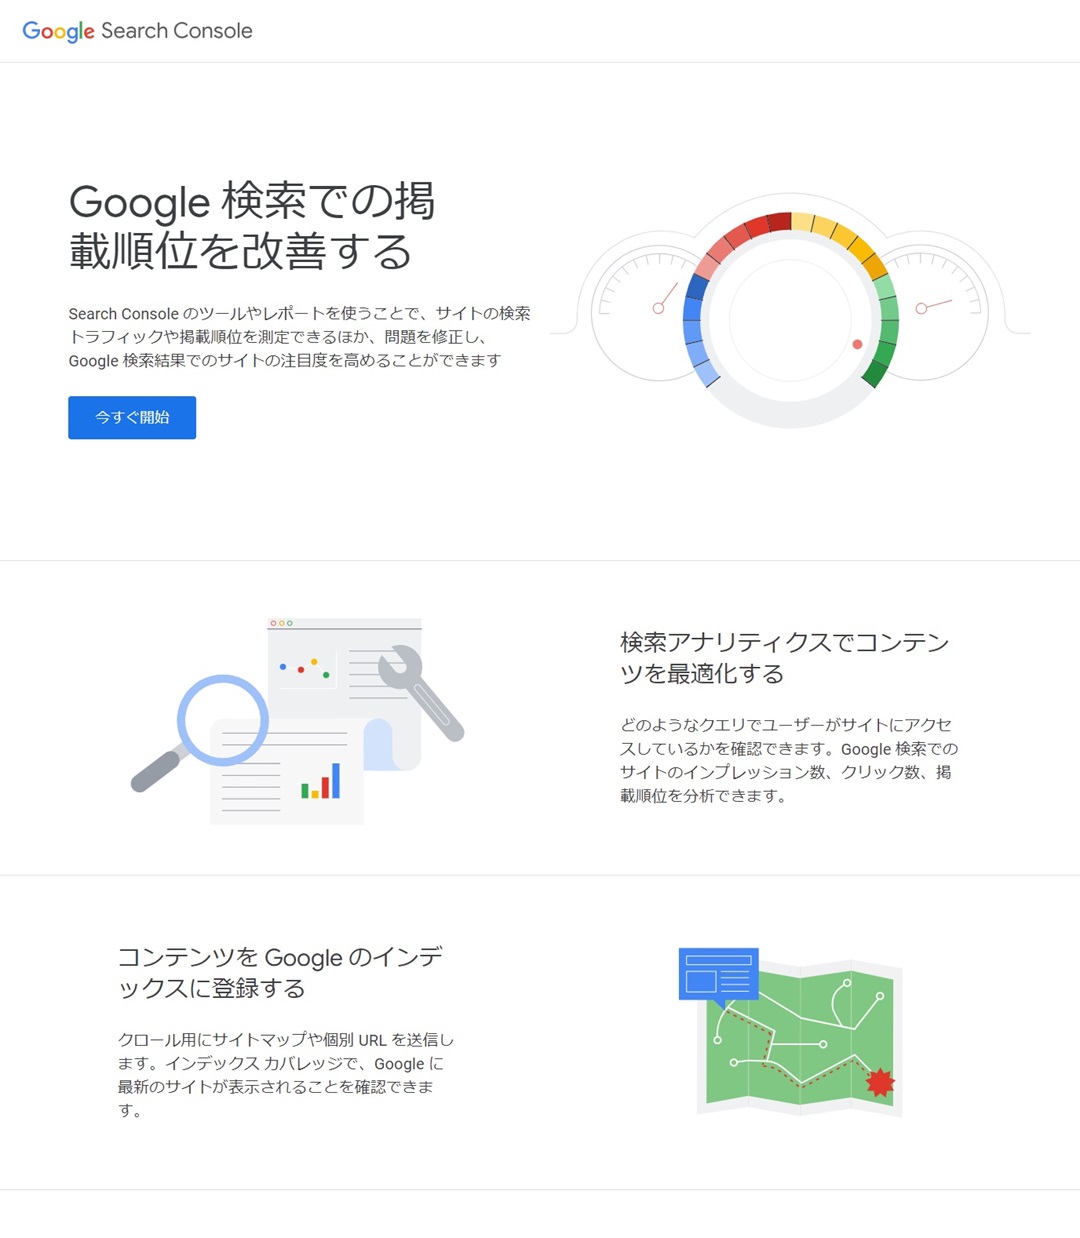 Google Search Consoleのプロパティタイプの選択画面